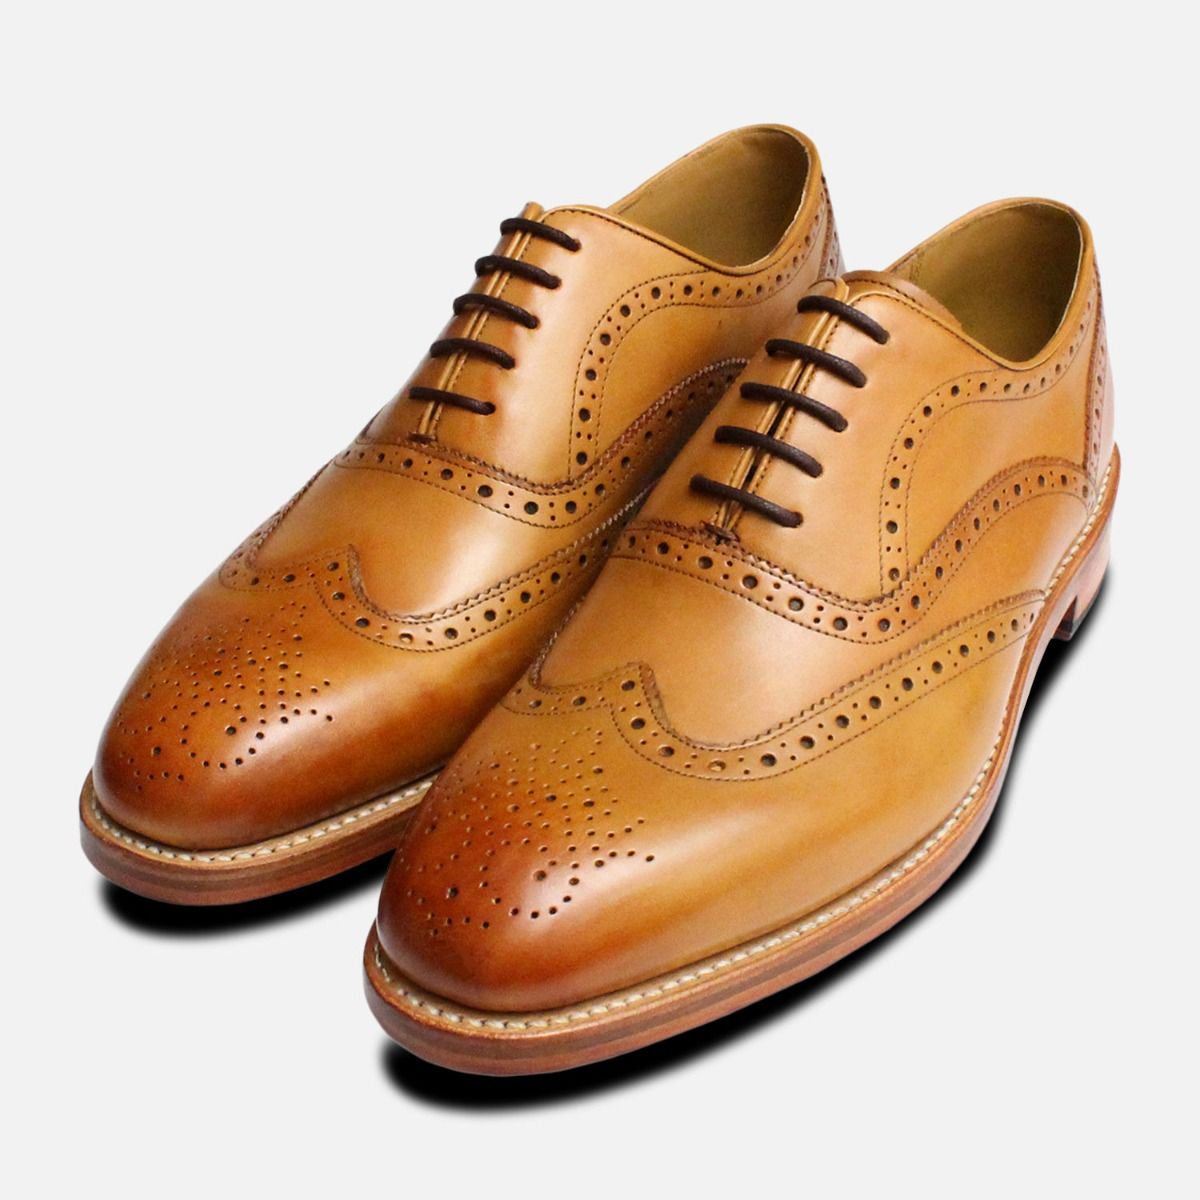 oliver sweeney oxford shoes